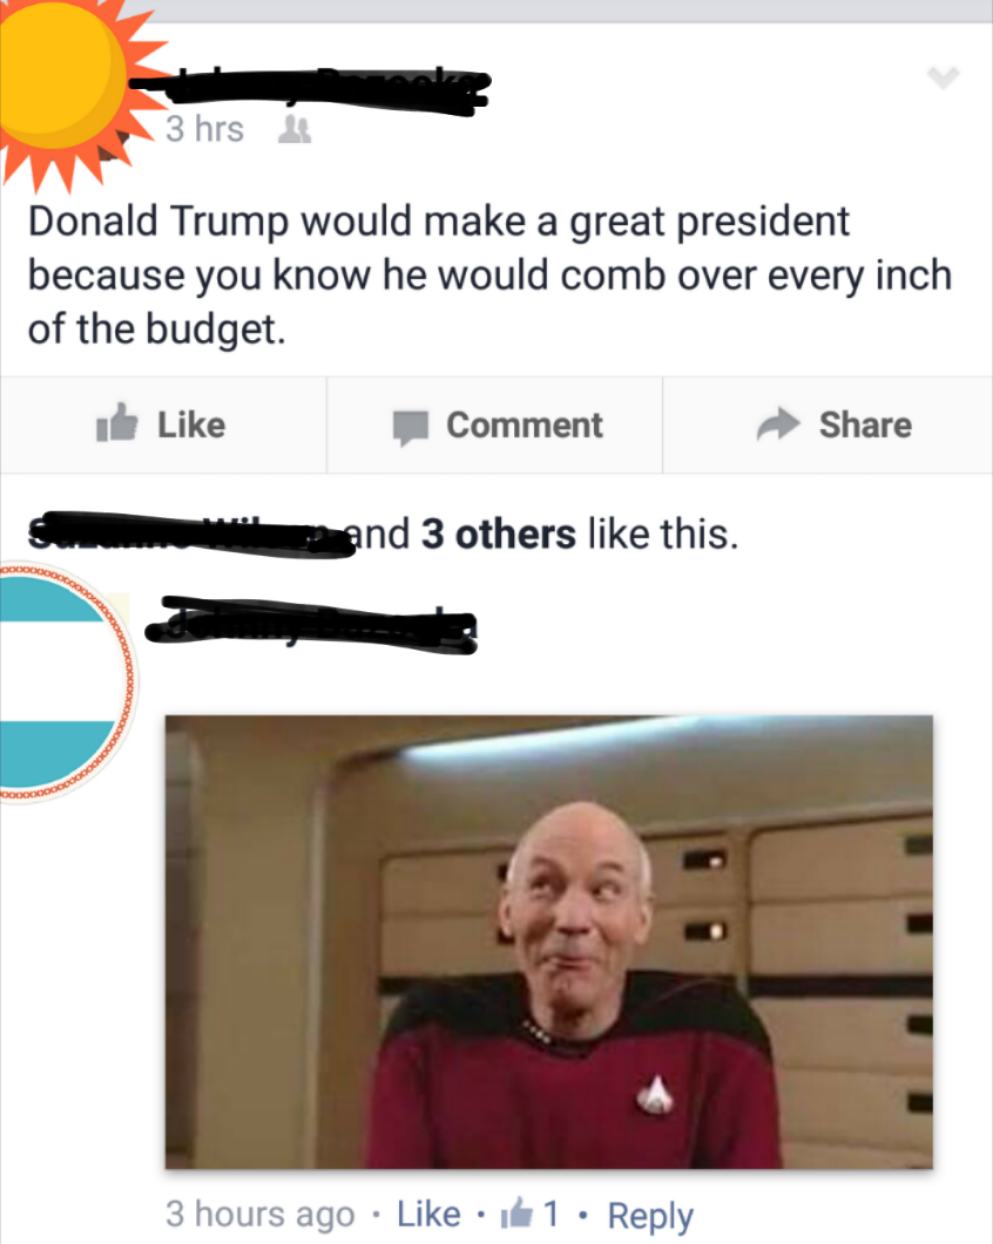 media - 3 hrs 14 Donald Trump would make a great president because you know he would comb over every inch of the budget. Comment and 3 others this. 3 hours ago 1